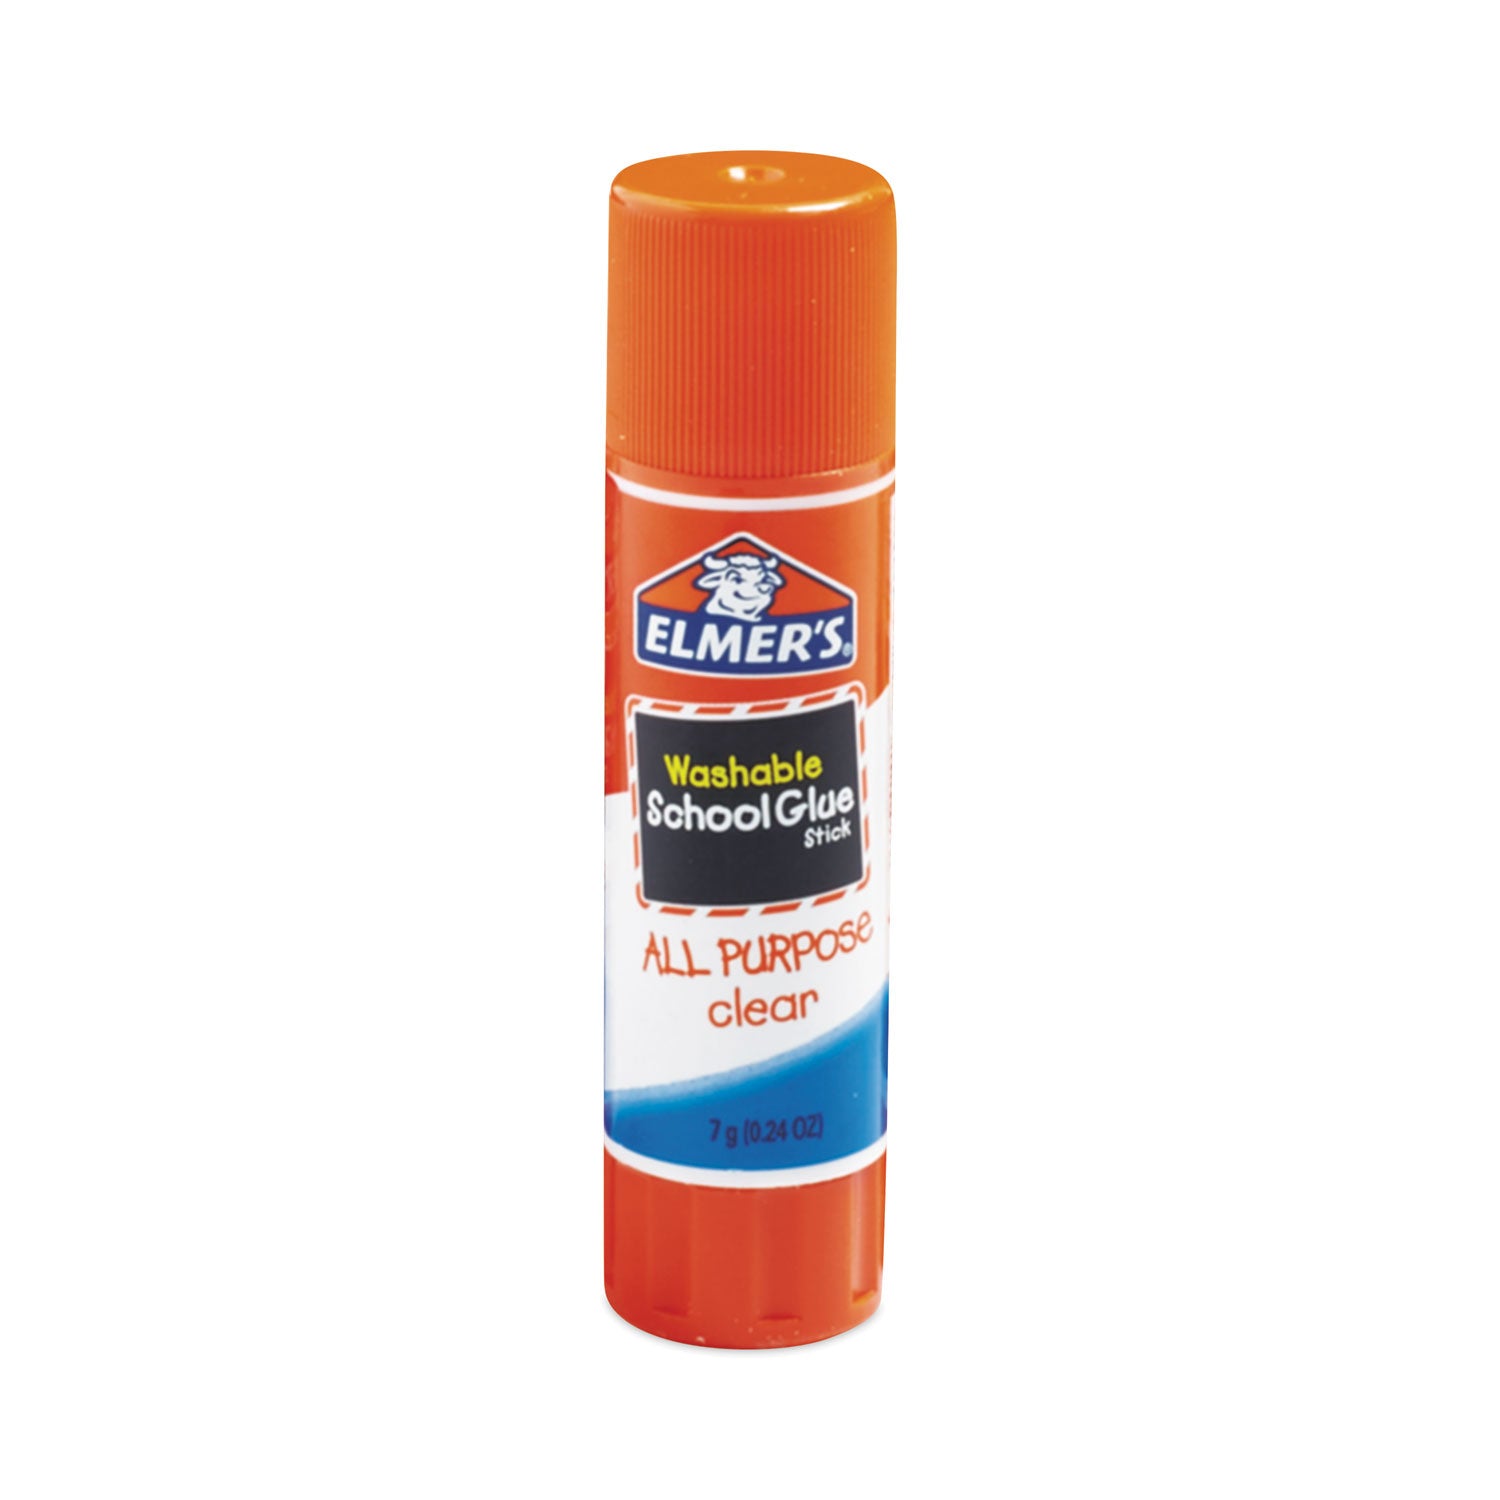 Washable School Glue Sticks, 0.24 oz, Applies and Dries Clear, 4/Pack - 